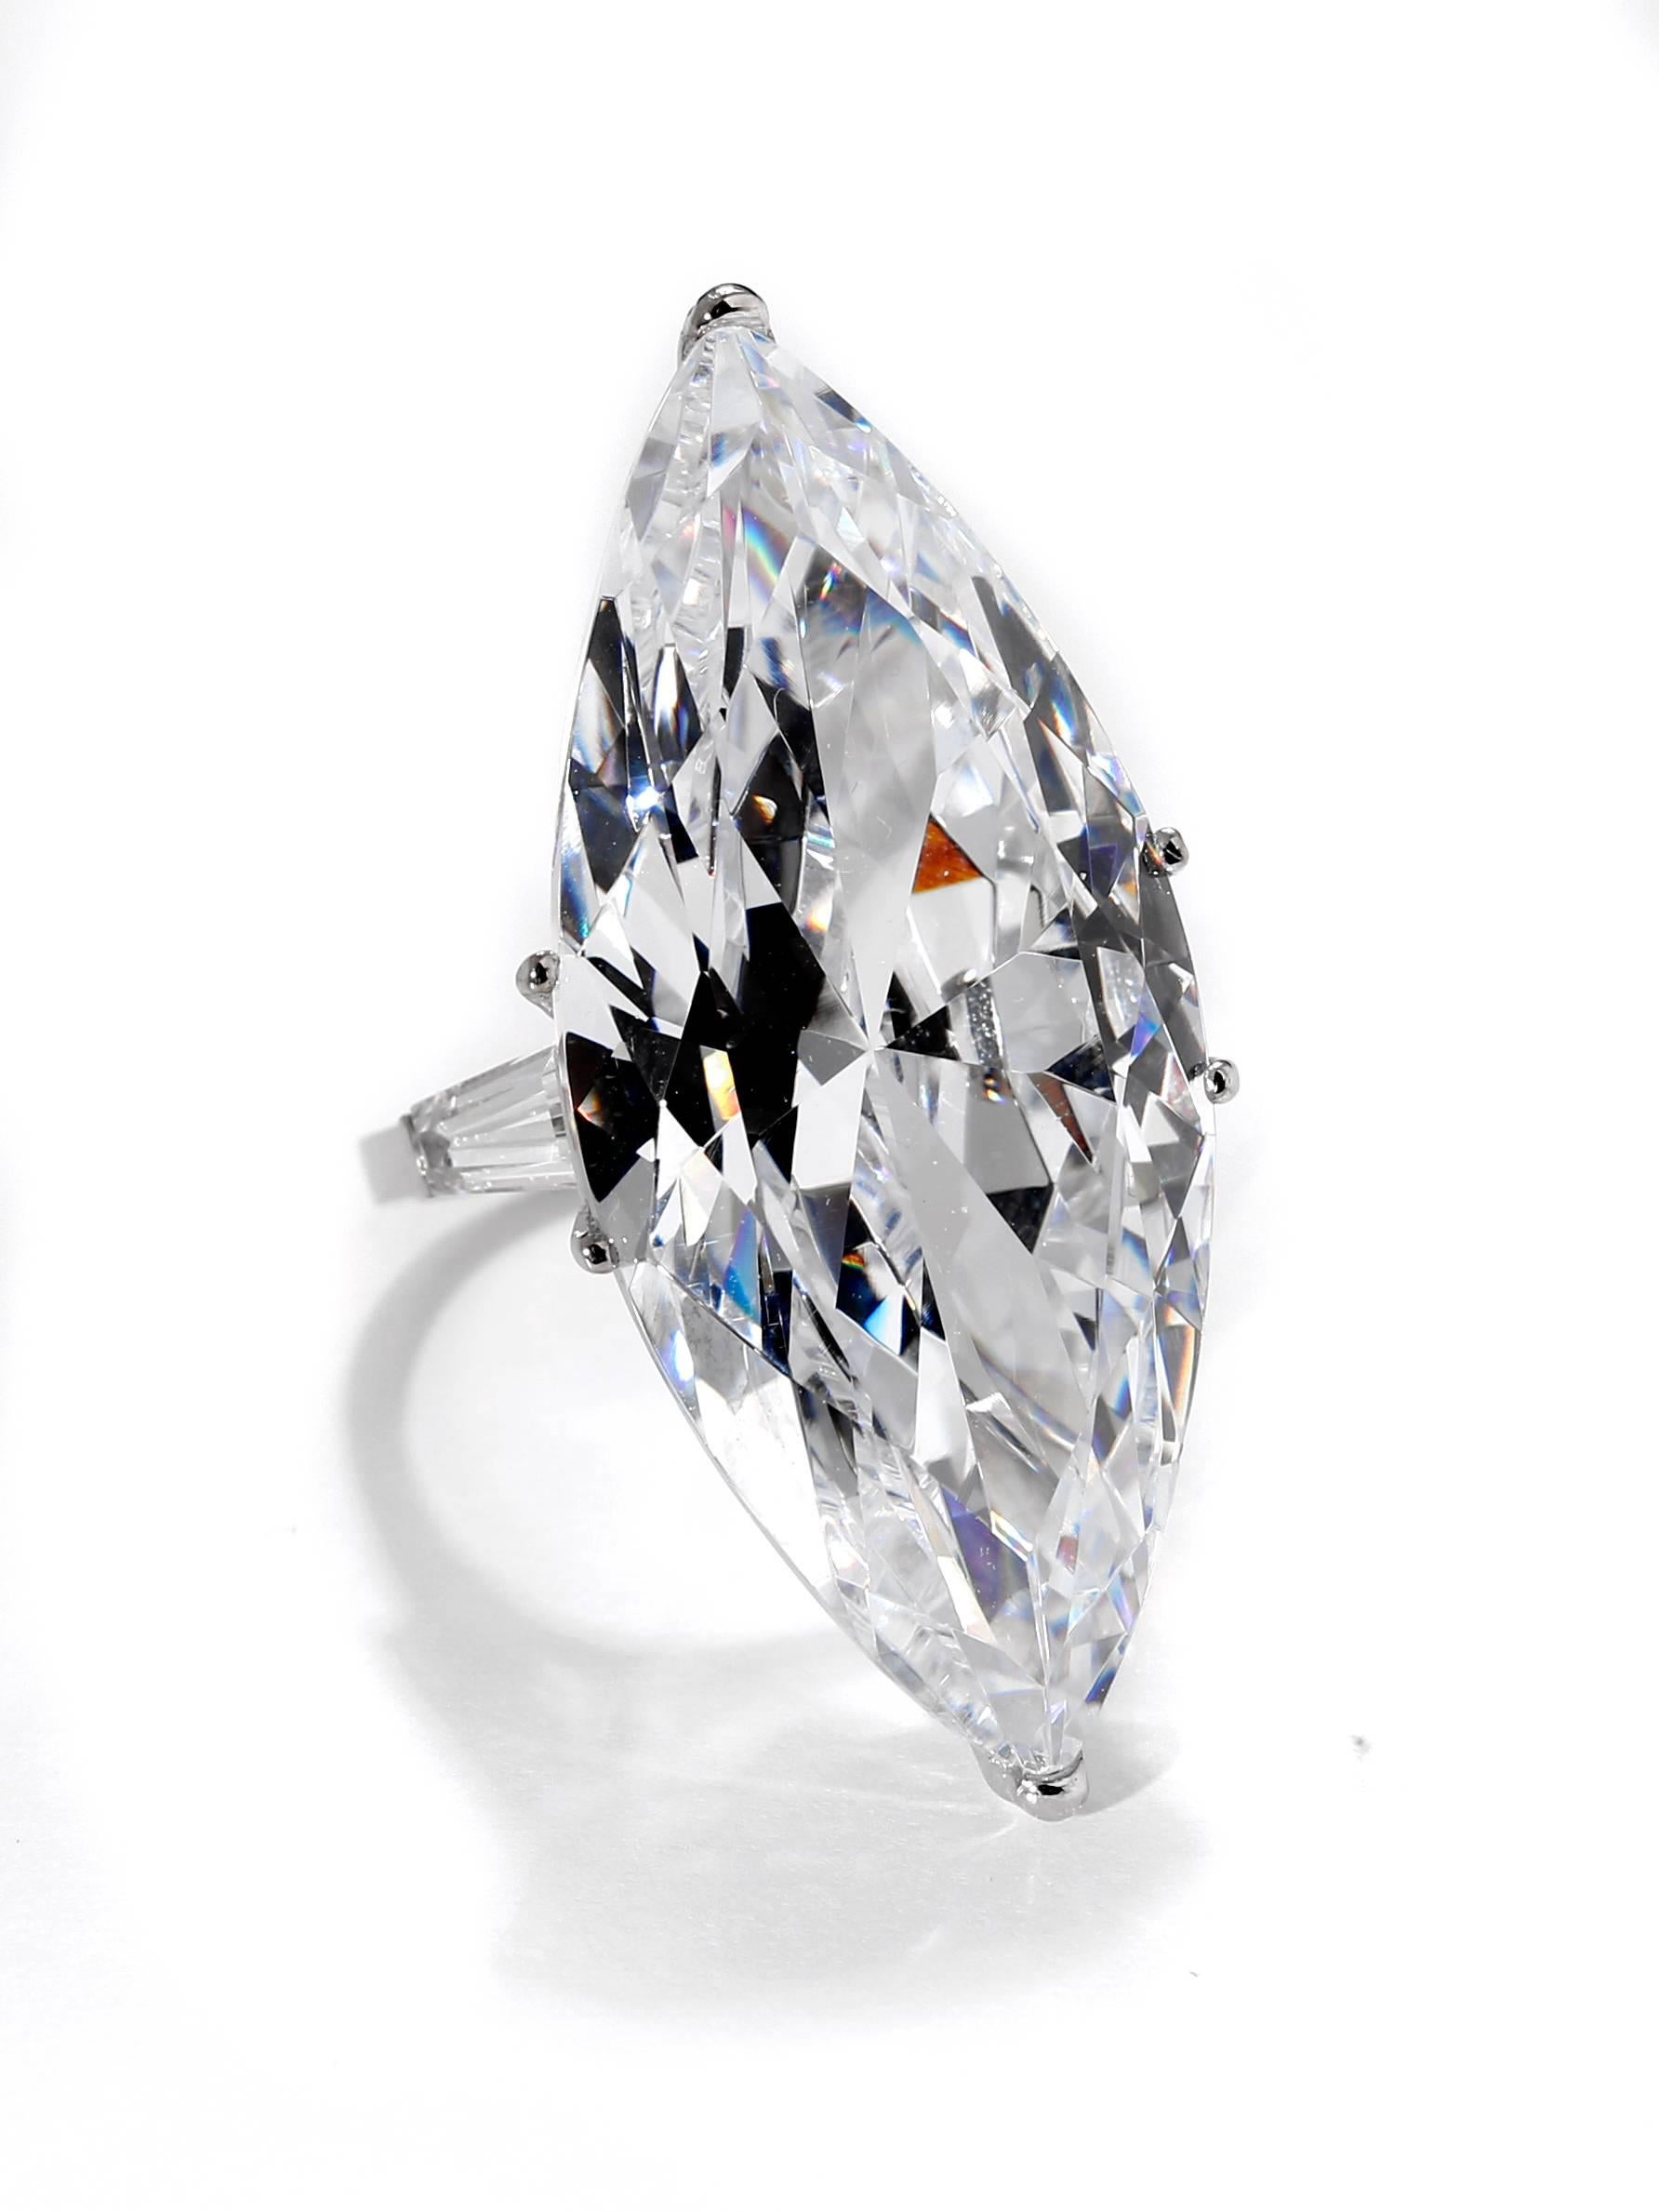 A Fabulous Fake. One for sale here, one sold at Sotheby's by Daniele Steele that had been bought at Bergdorfs in the 1990s. A copy of the Real One made in D Color Flawless cubic zircon hand-cut by a NYC diamond cutter. Sides set with tapered CZ